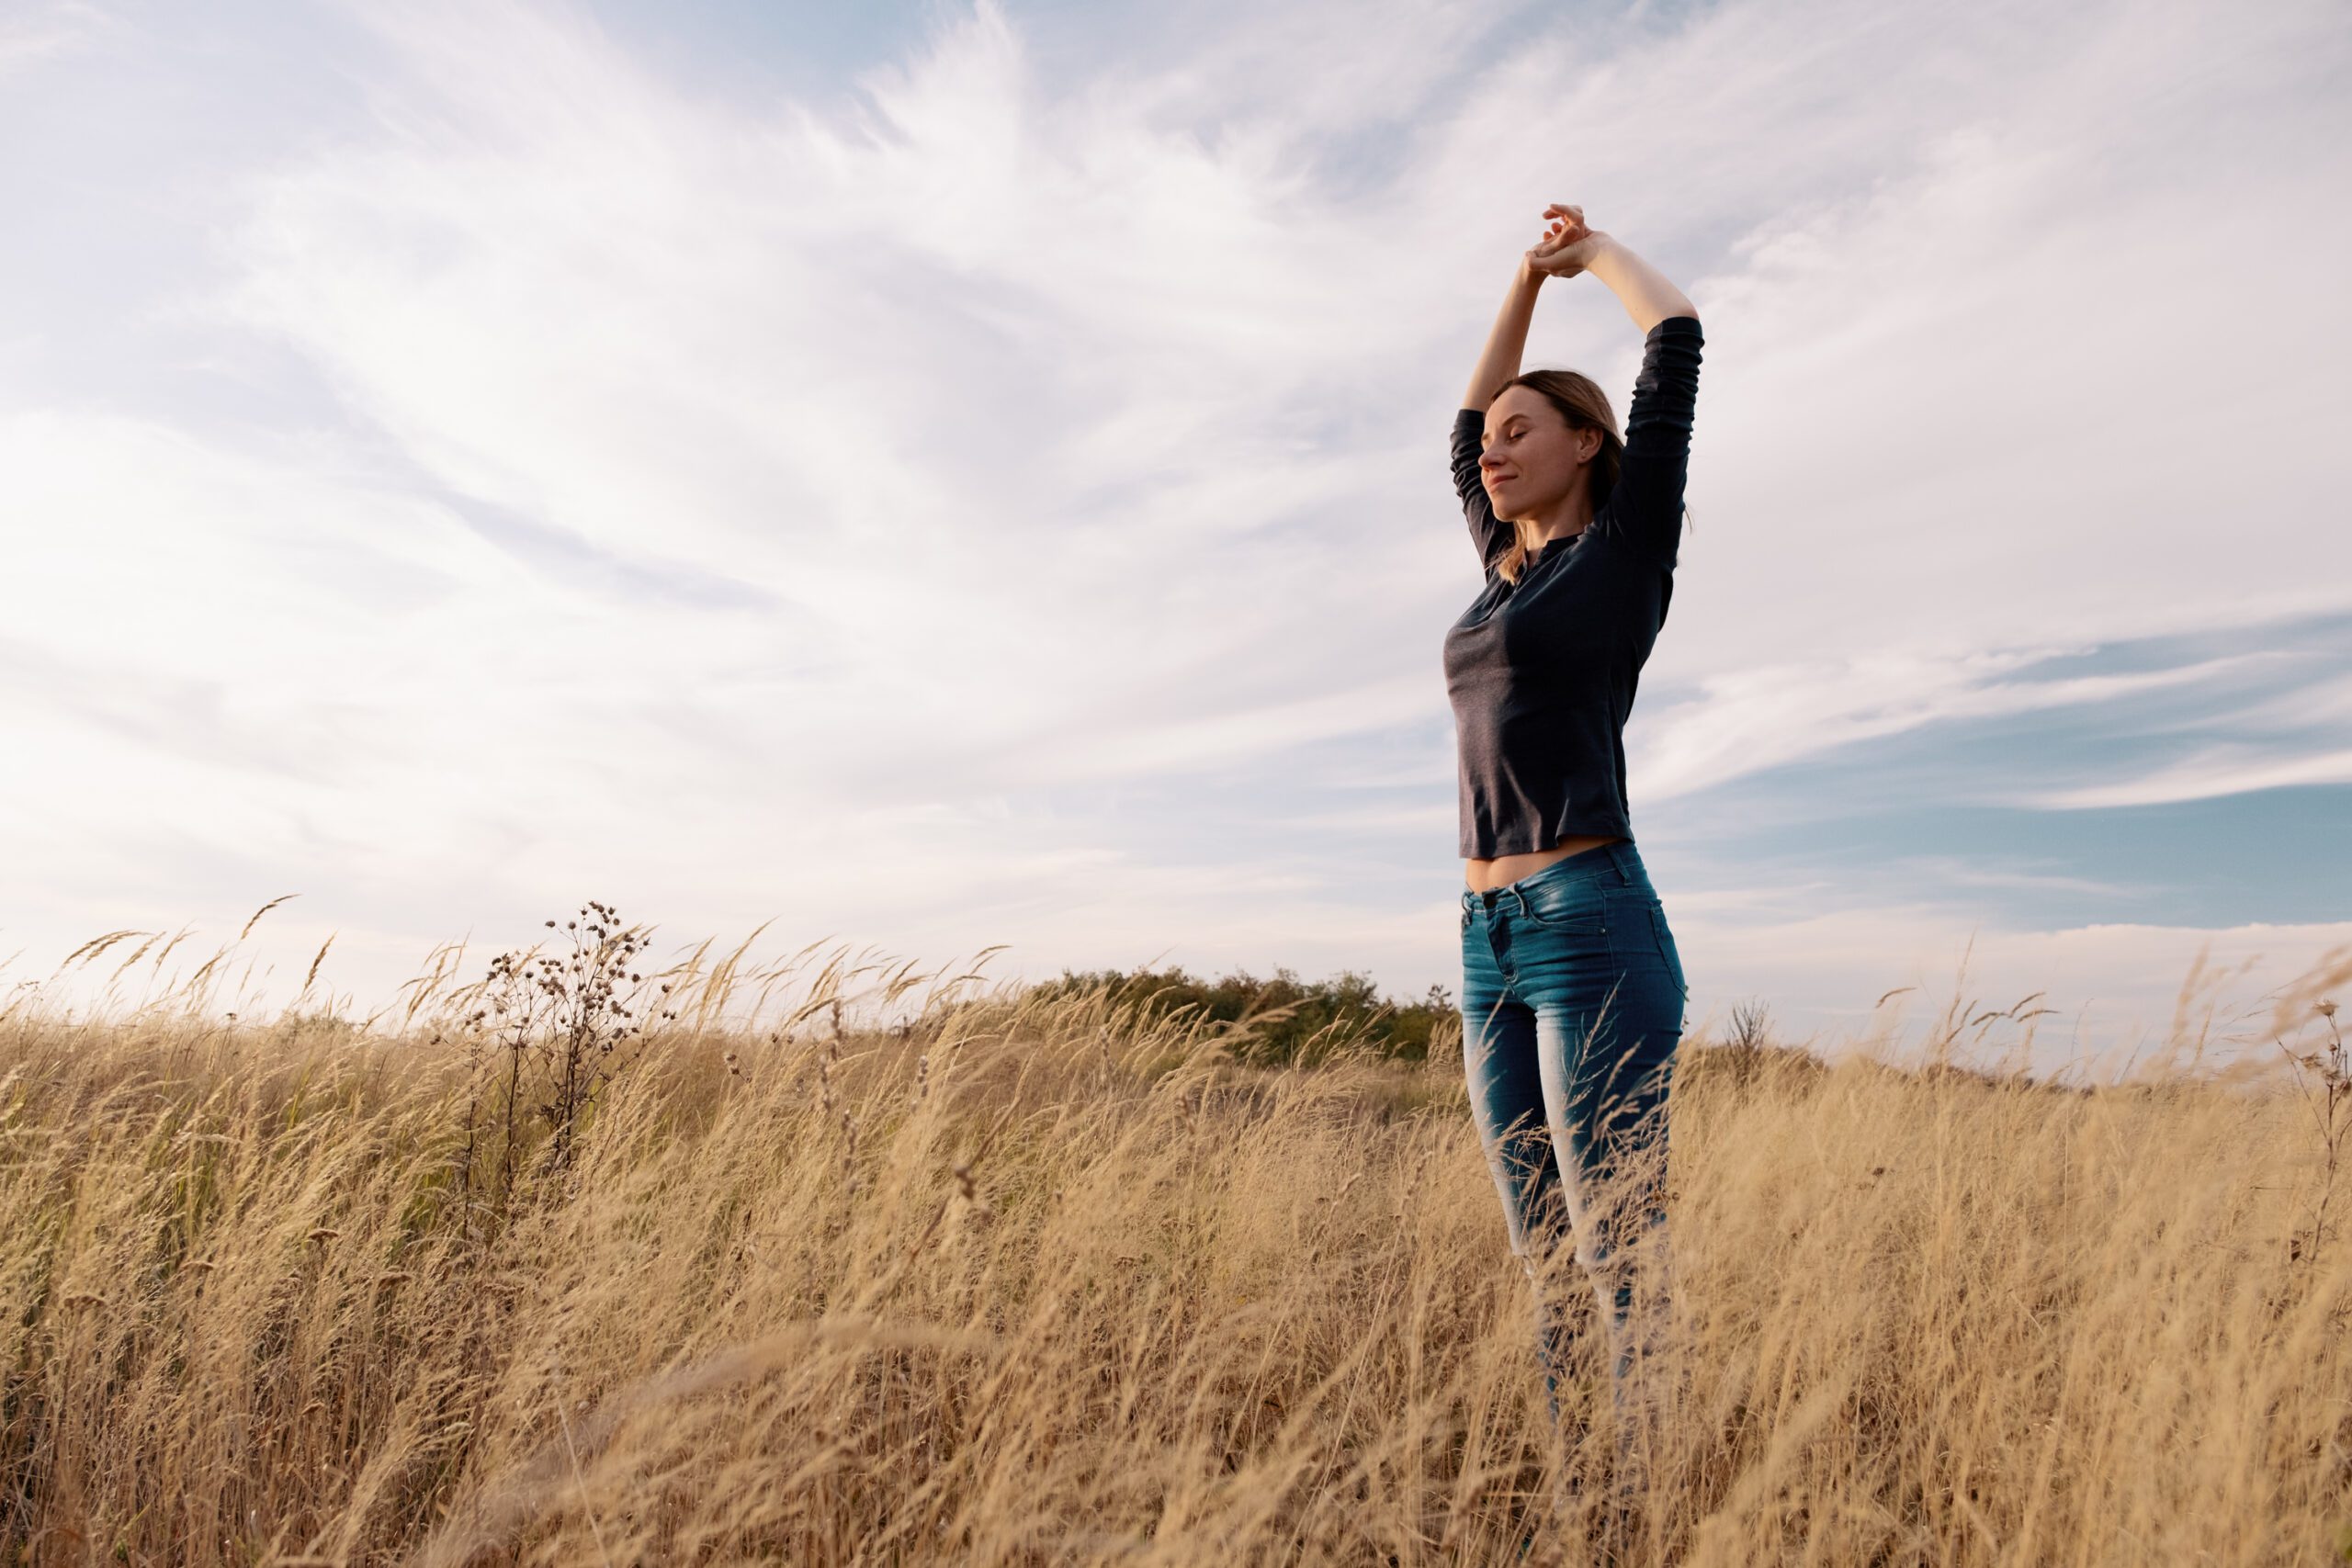 Young woman enjoying nature and freedom in a golden field under the blue sky